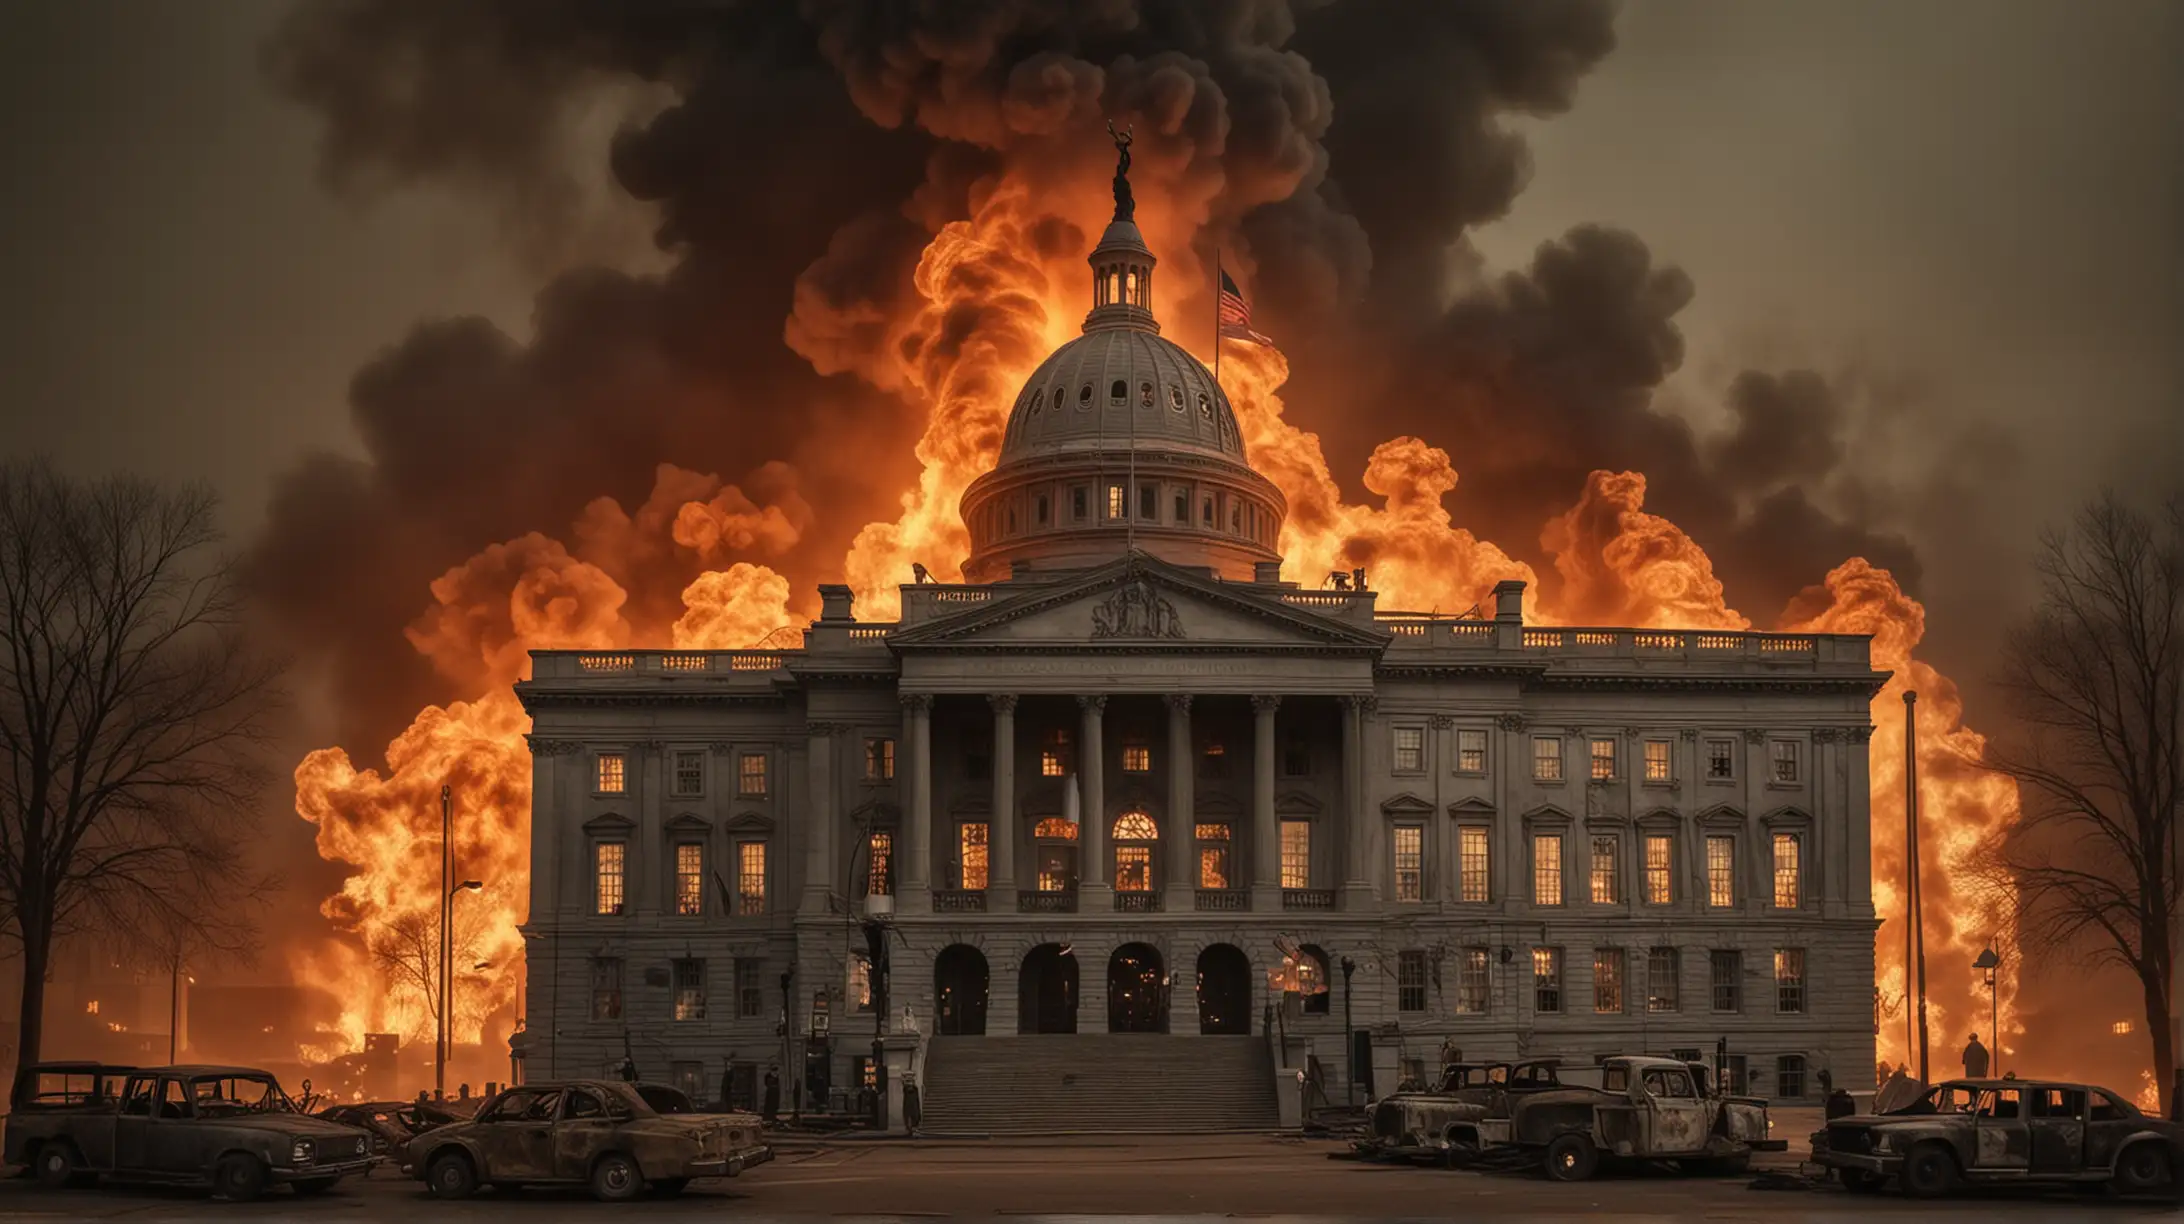 US state house on fire, depicting economy and oil crisis in very dark smokey background that looks like a crisis